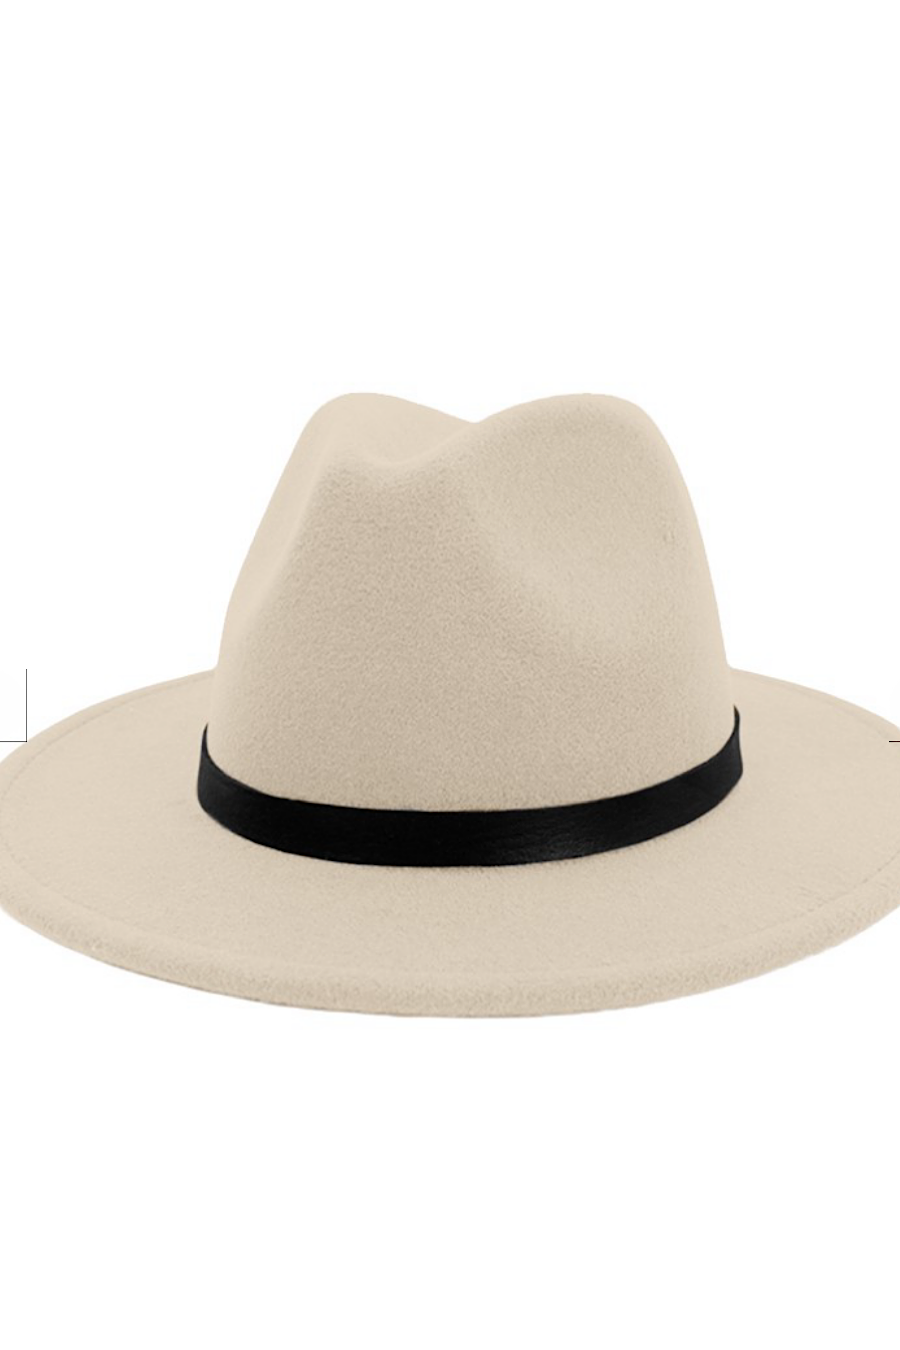 Fedora with Solid Black Band in Sev. Colors!